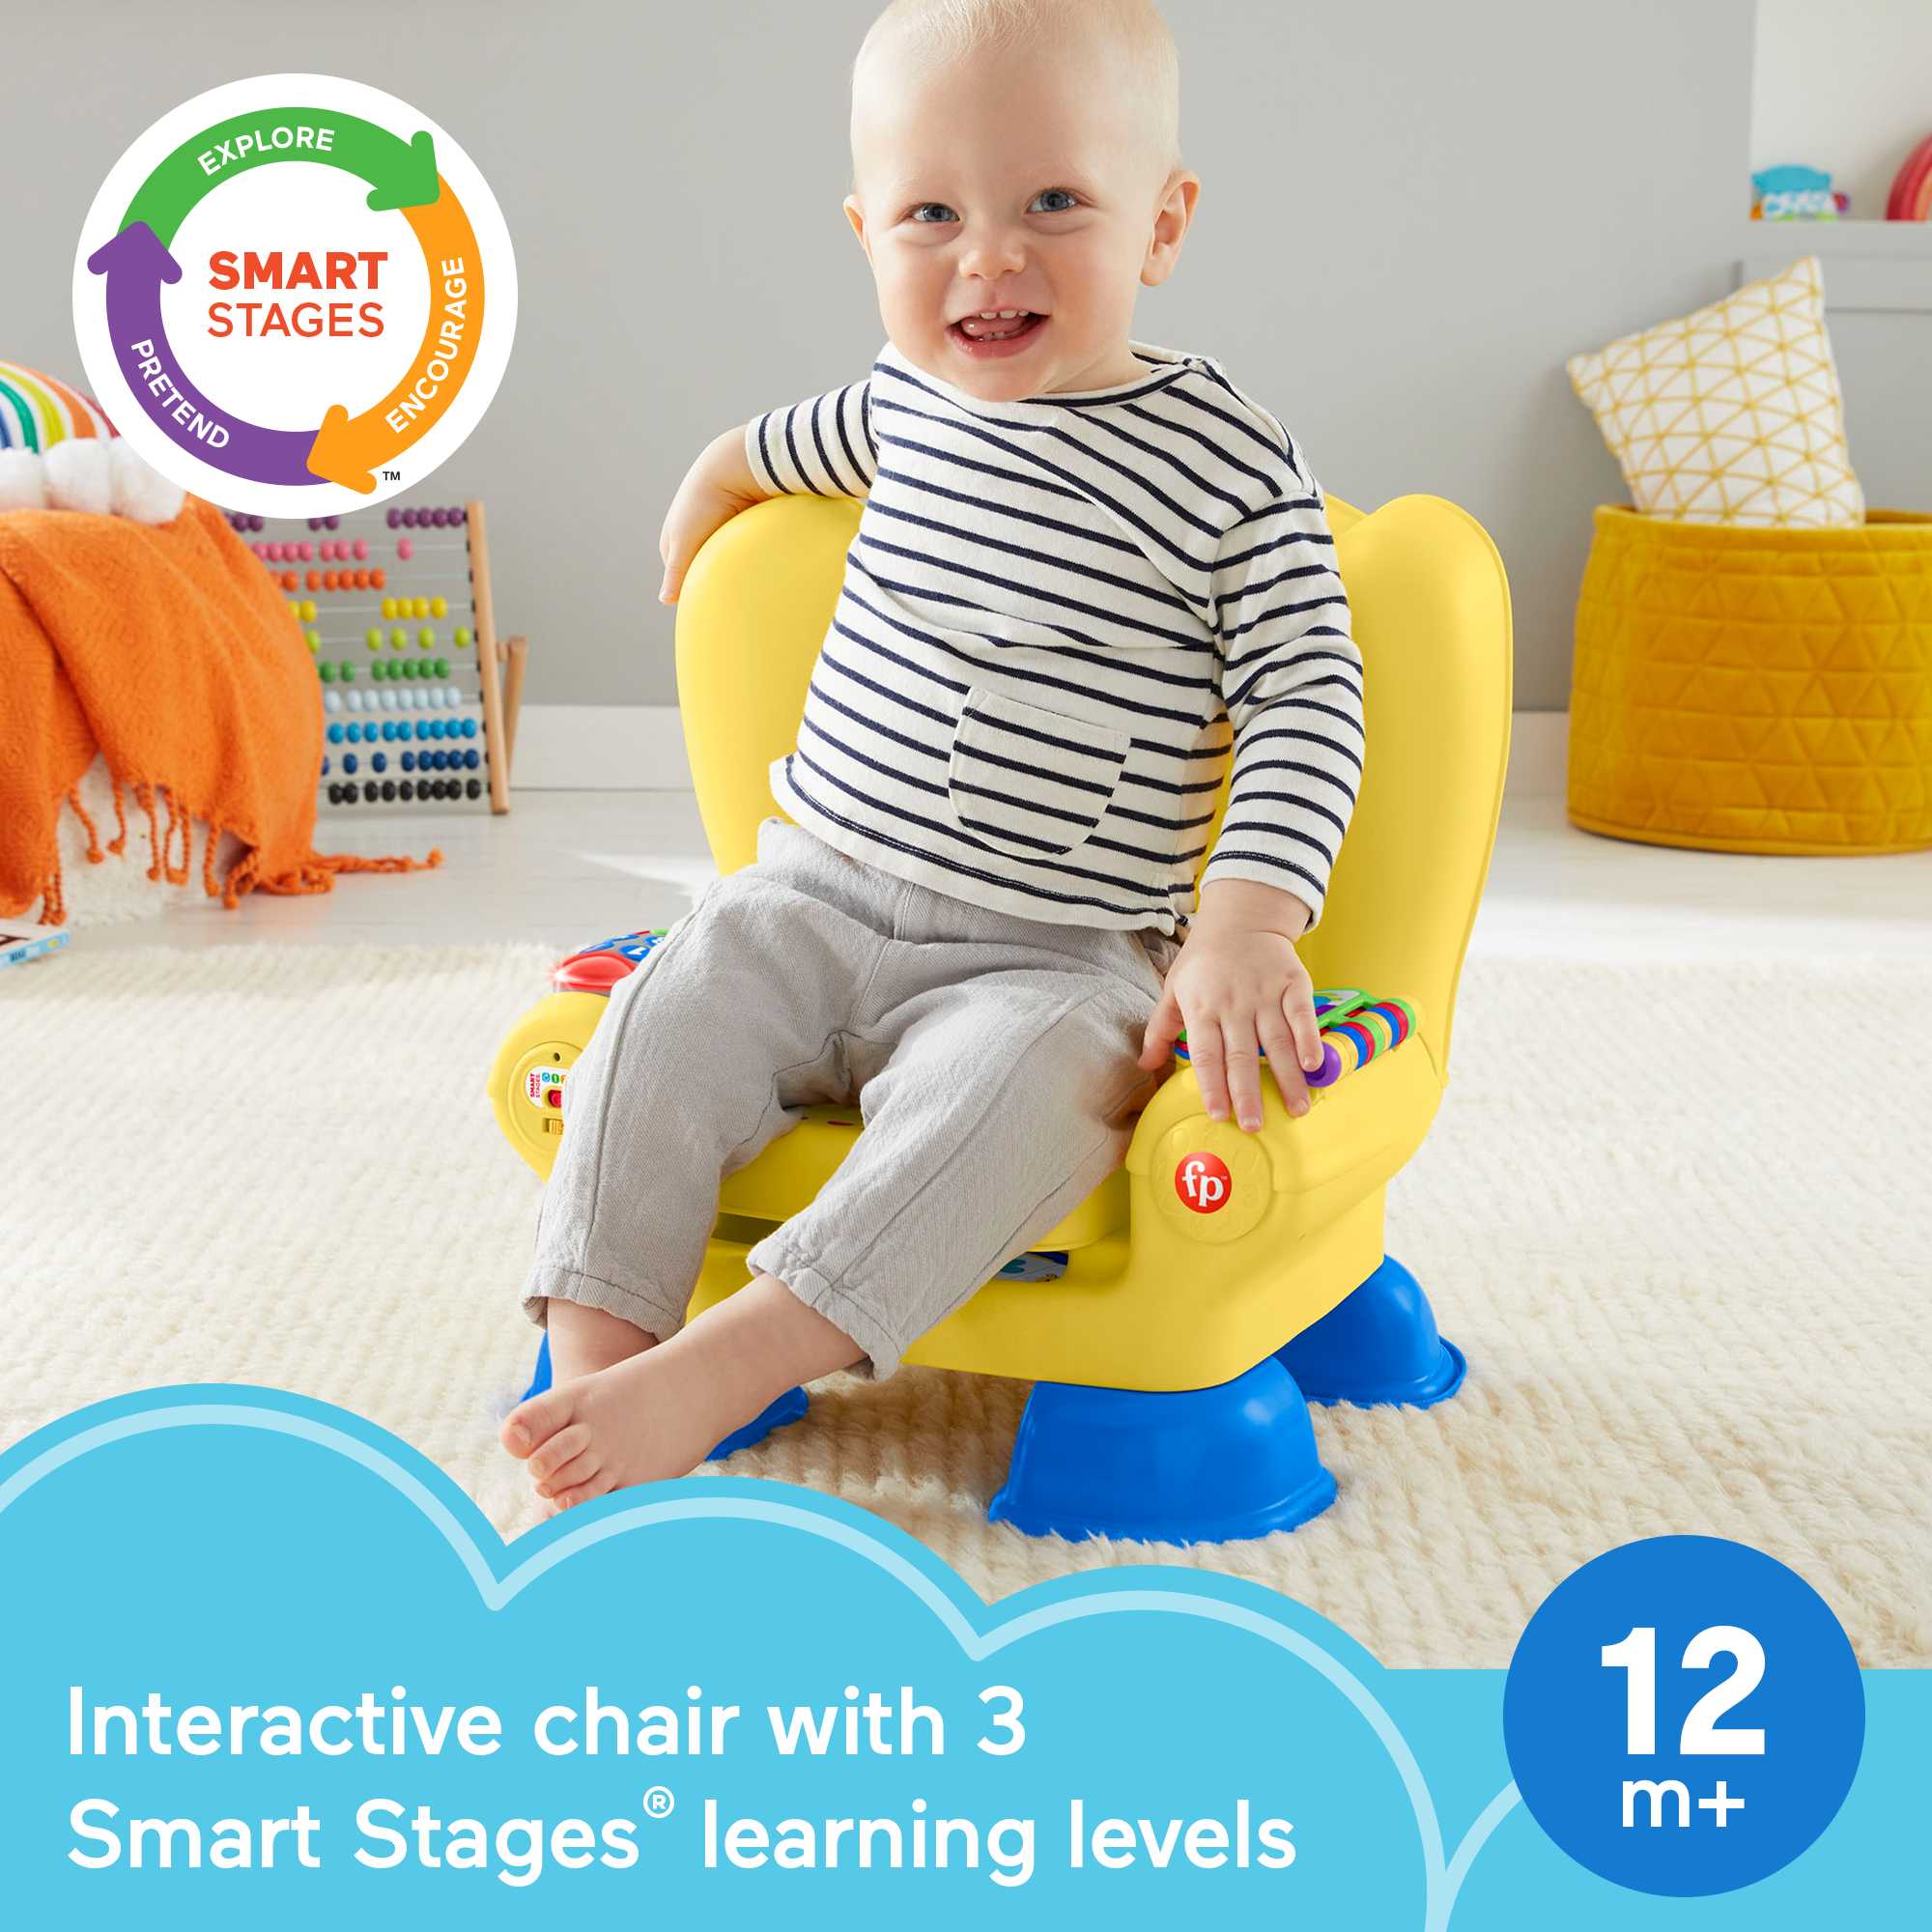 Fisher-Price Laugh & Learn Smart Stages Chair Electronic Learning Toy for Toddlers, Yellow - image 3 of 7